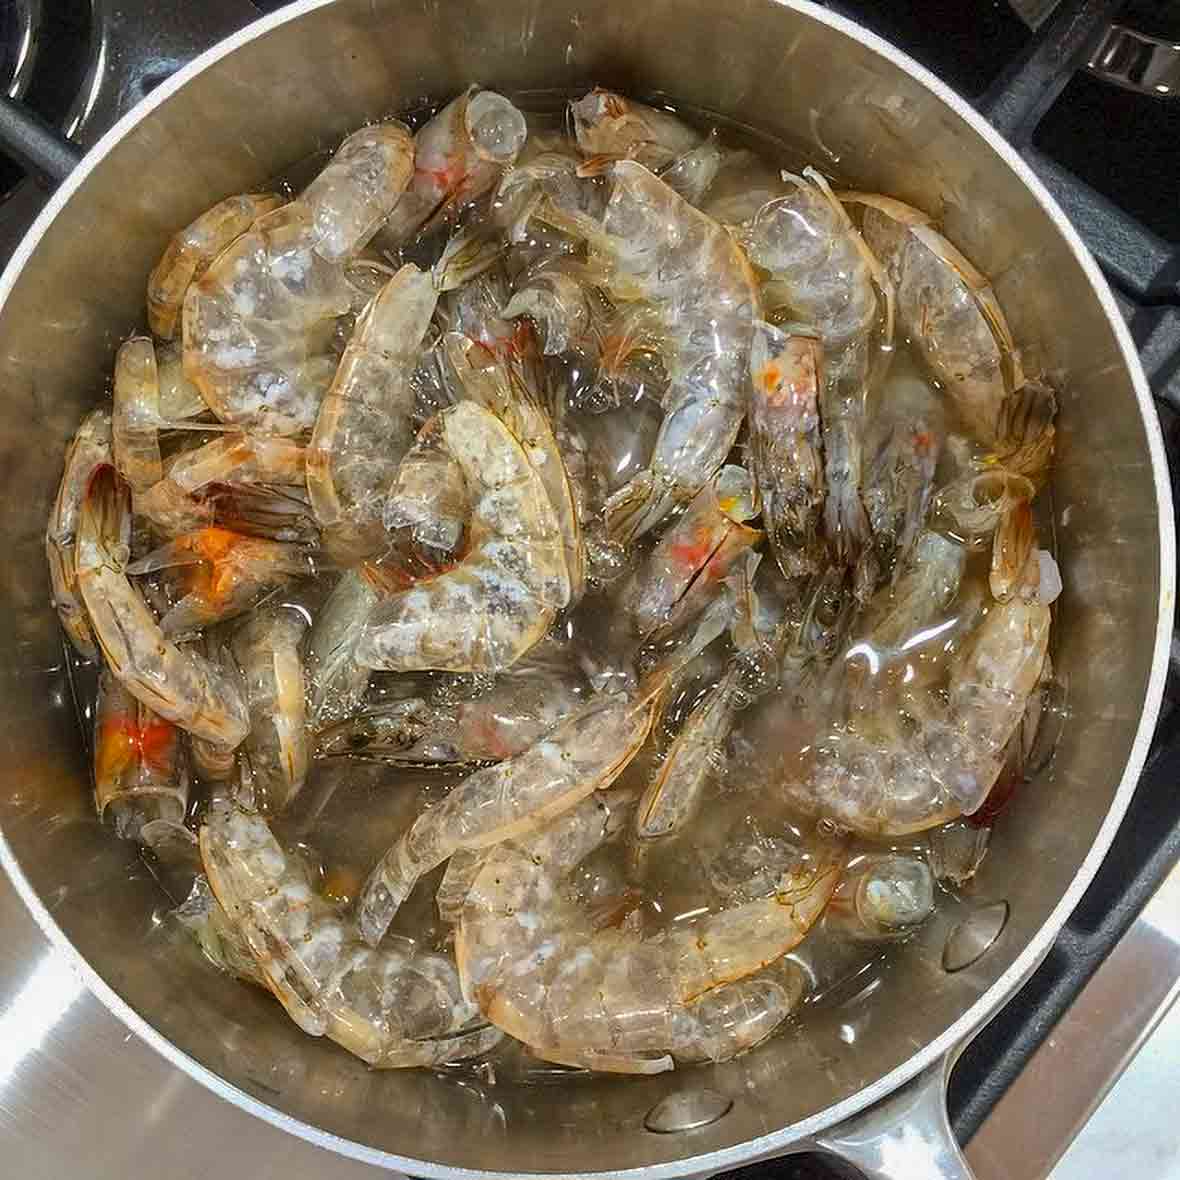 A pot filled with shrimp shells and heads, all to make shrimp stock